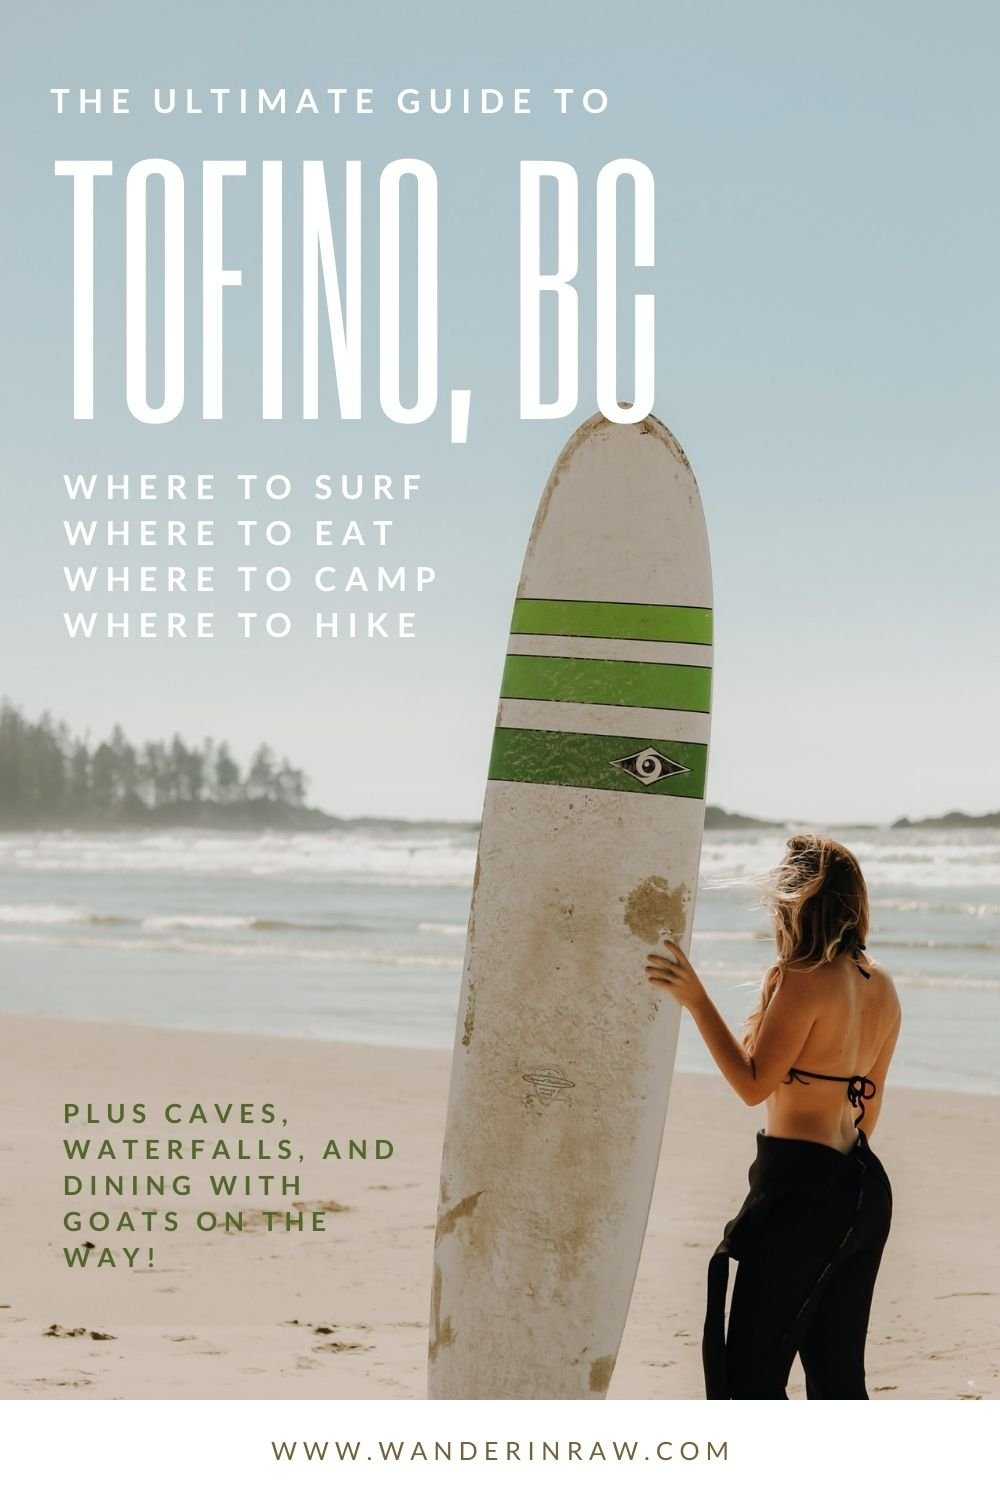 Victoria to Tofino: Things to Do in Tofino and Where to Stop Along the Way